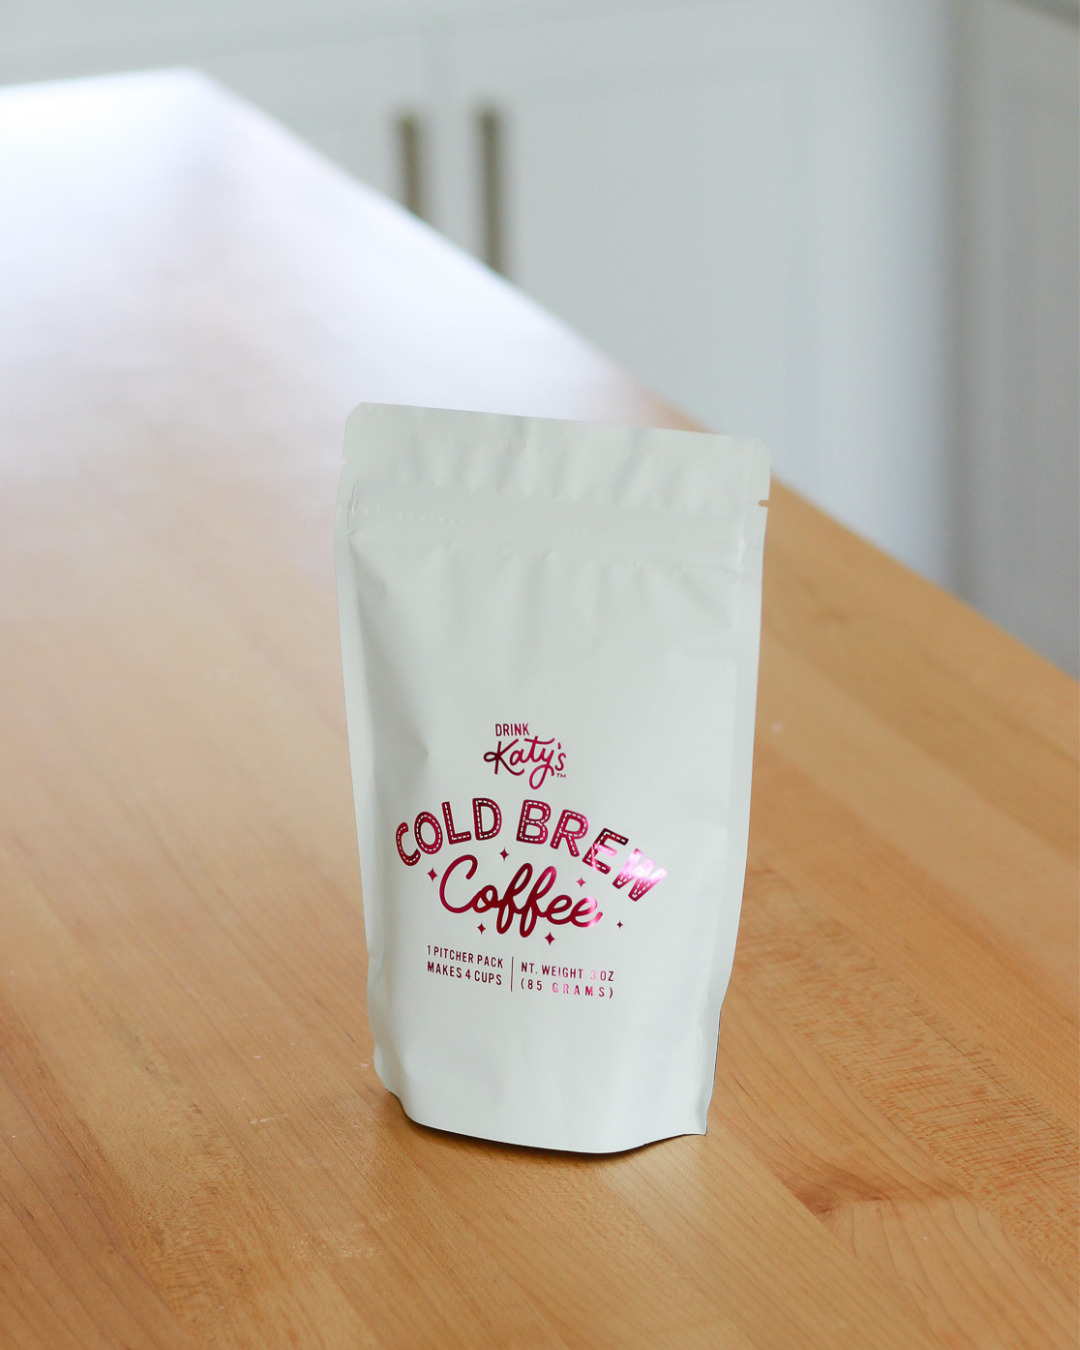 Cold Brew Coffee Pitcher Packs